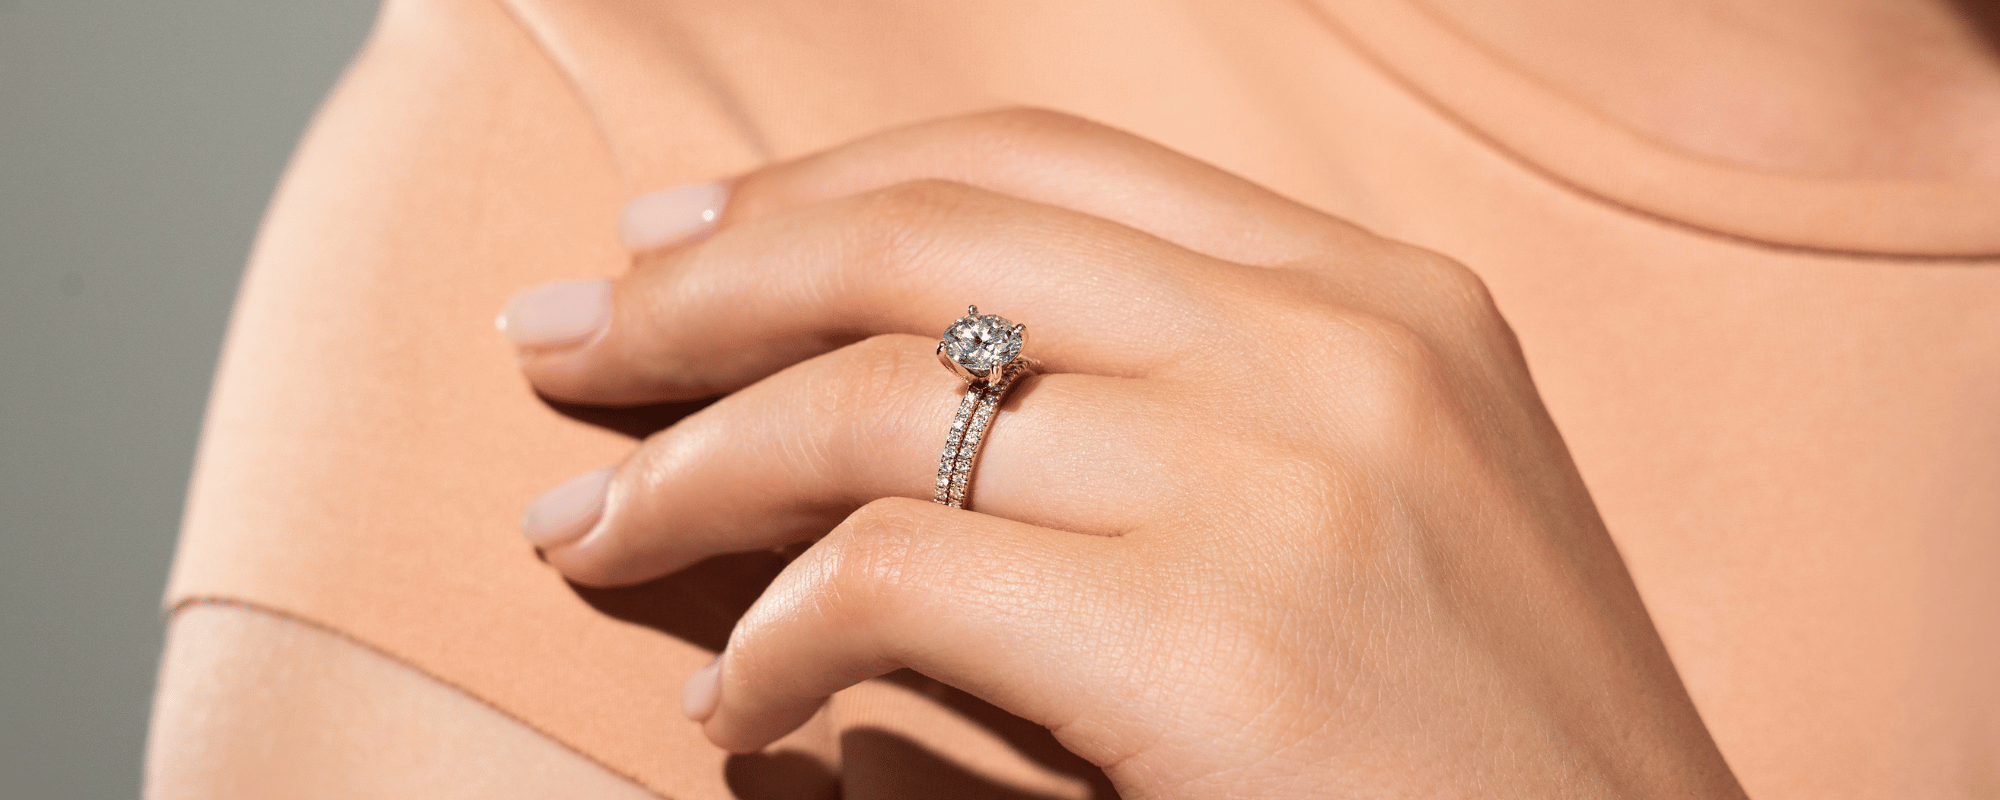 Engagement Rings Future Brides Will Want To Add To Her Pinterest Board | Popular  engagement rings, Most popular engagement rings, Best engagement rings